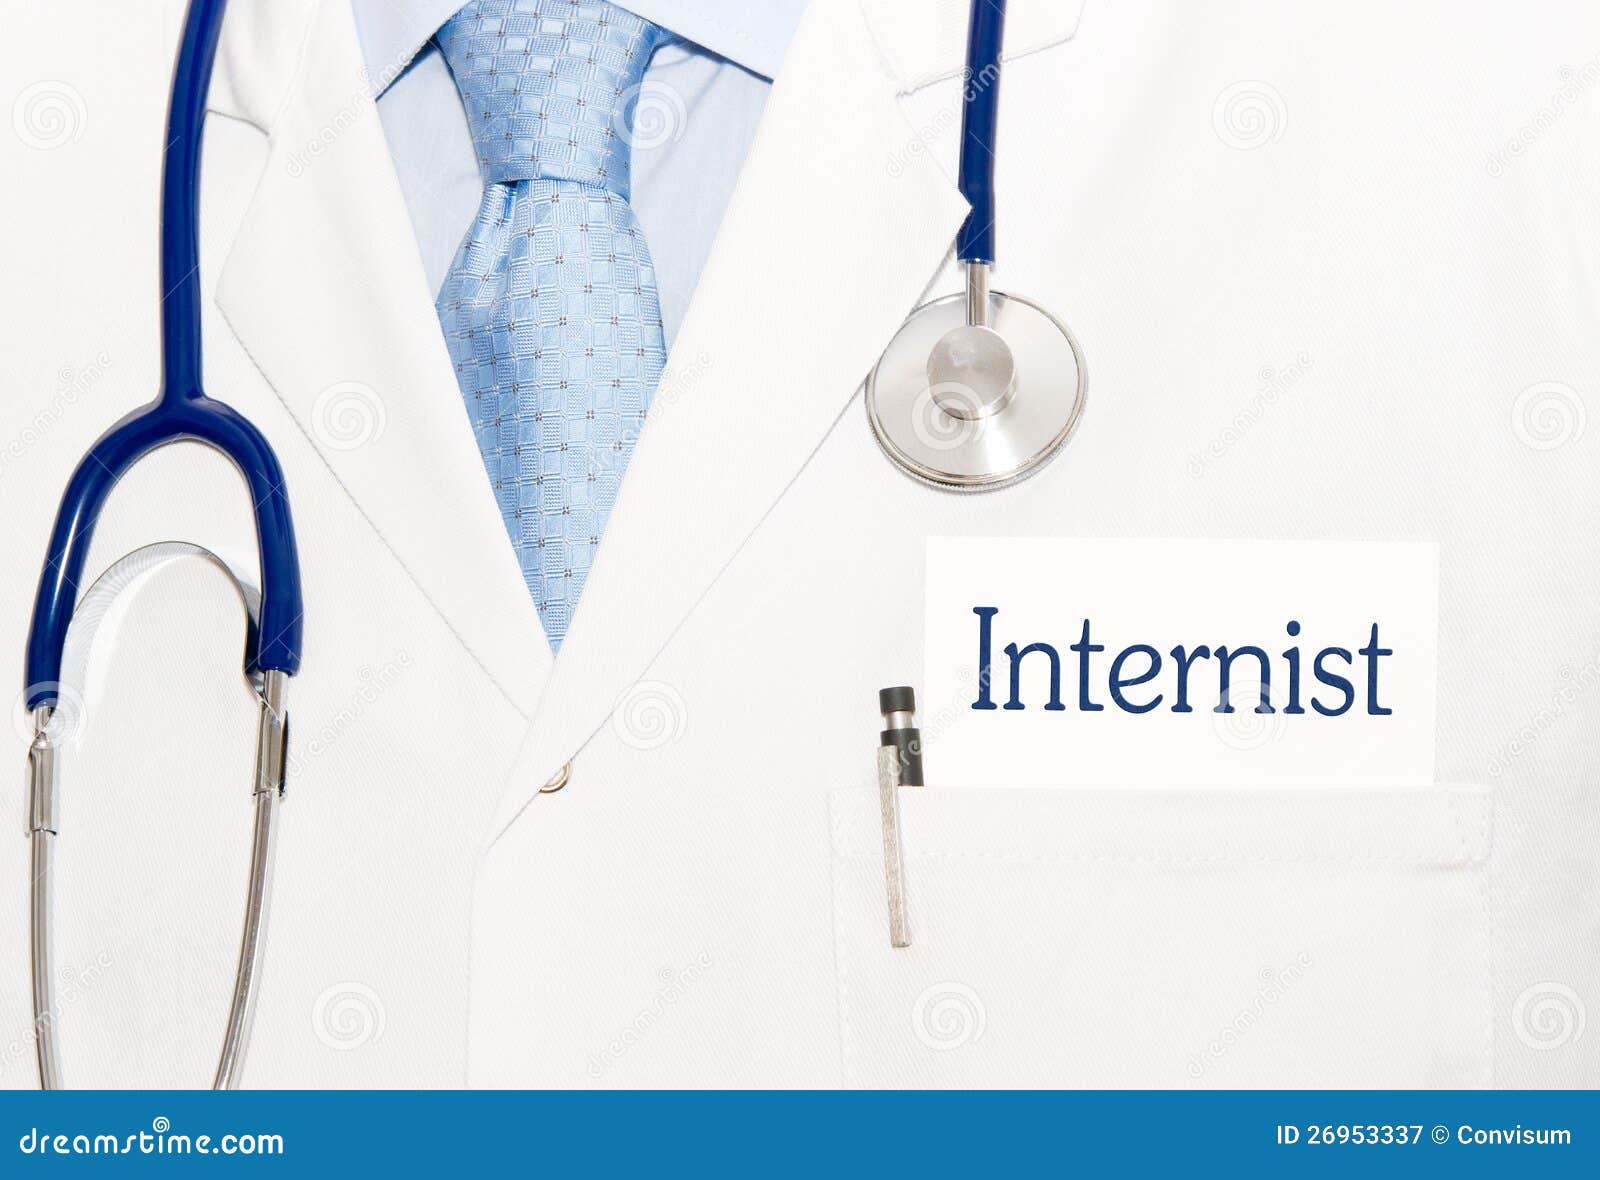 internist with stethoscope